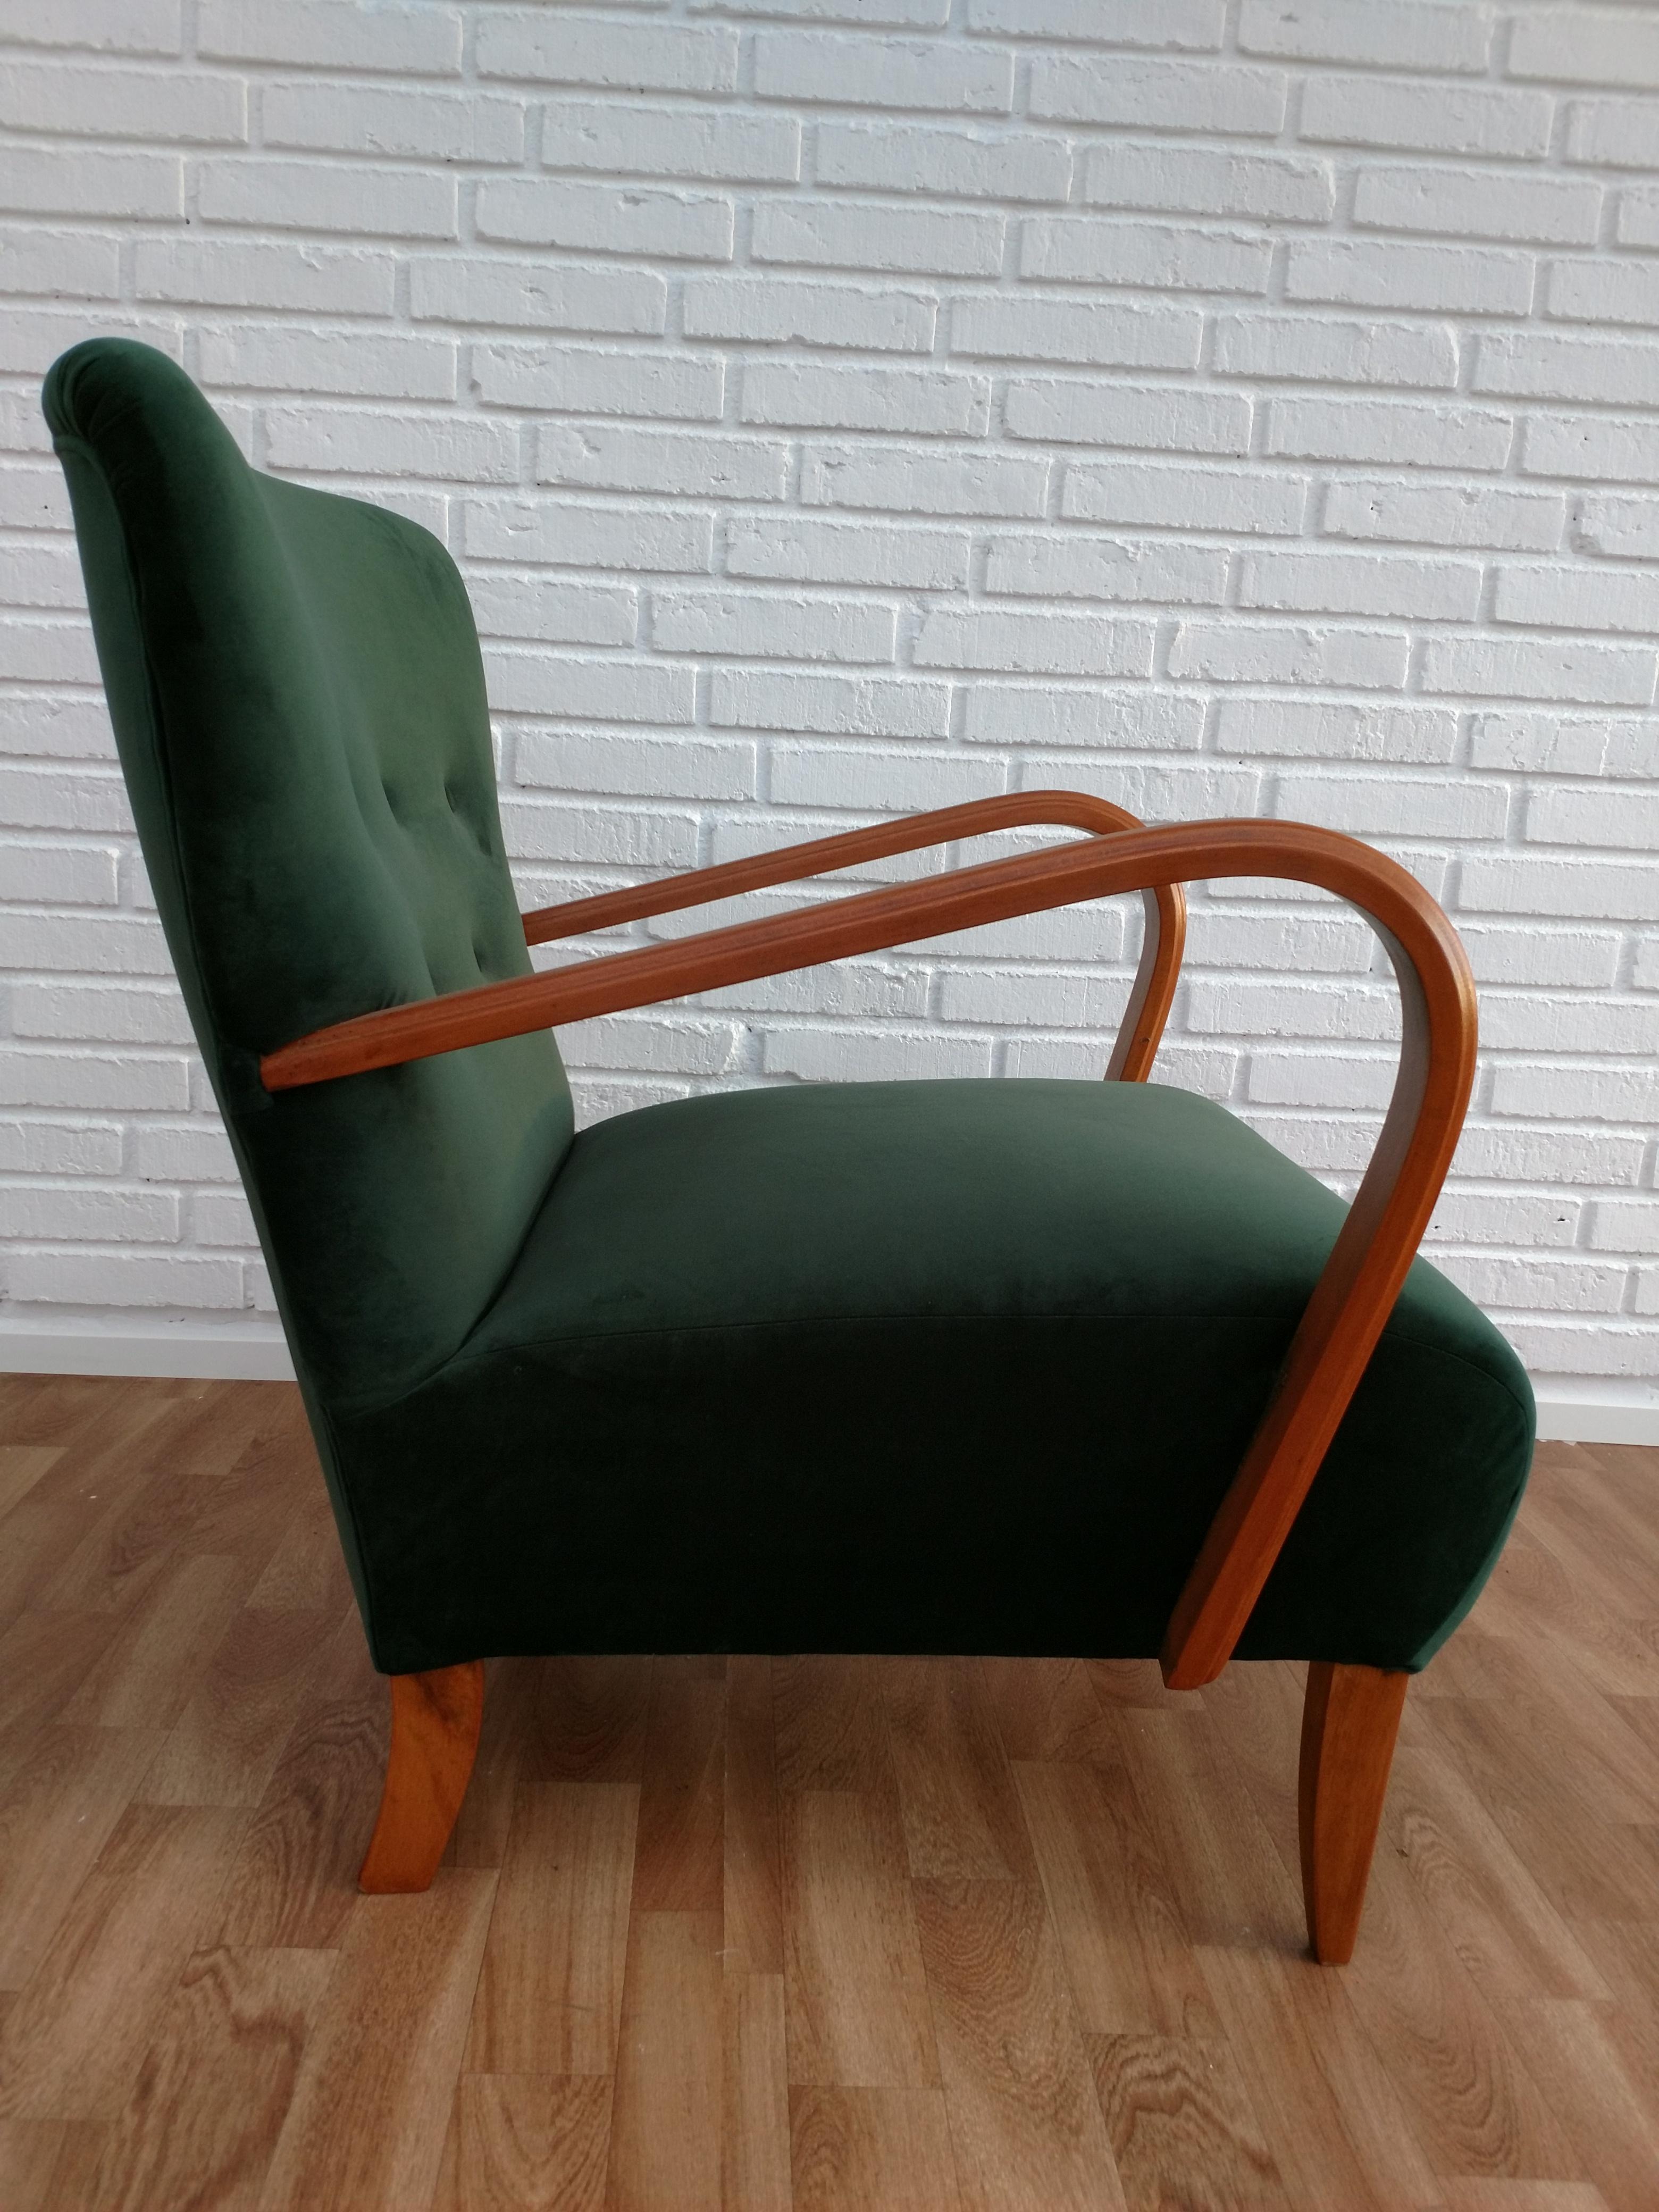 Stained Danish Art Deco Armchair, Velour, 1950s, Completely Restored For Sale